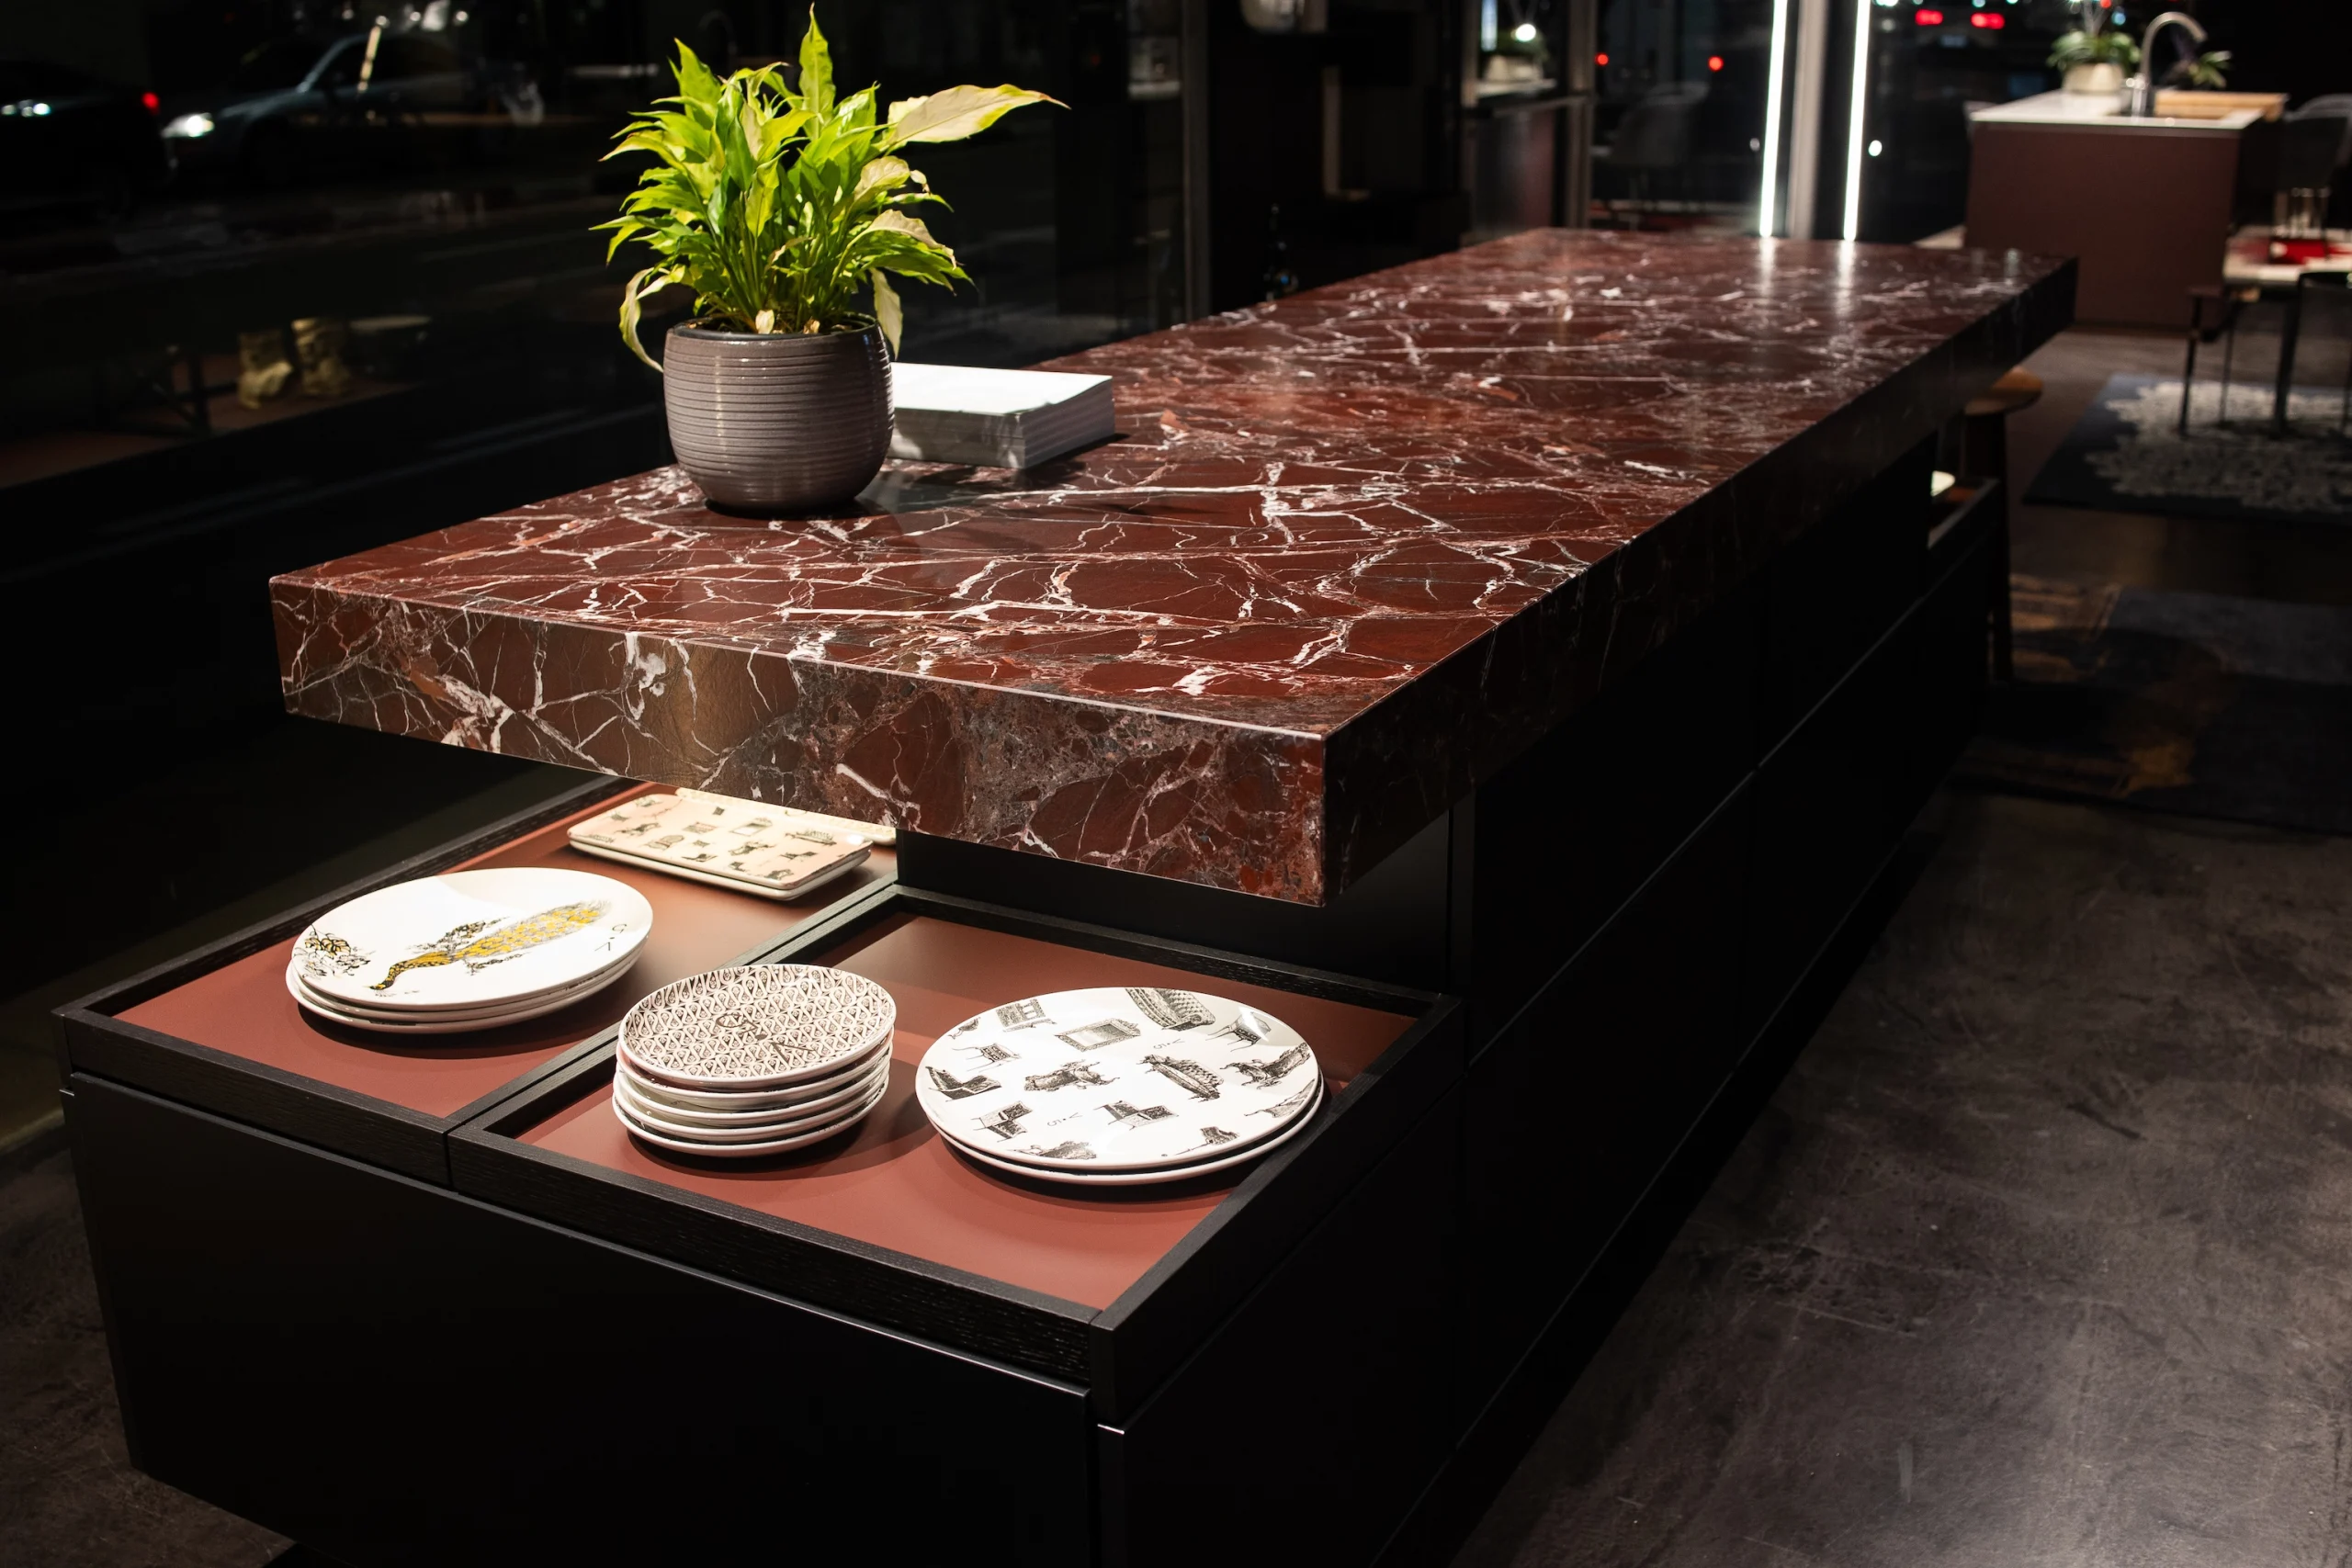 Photograph of the kitchen island. The countertop is made of red marble with white veins and has a thickness of 10 centimeters. The sides of the island are black.